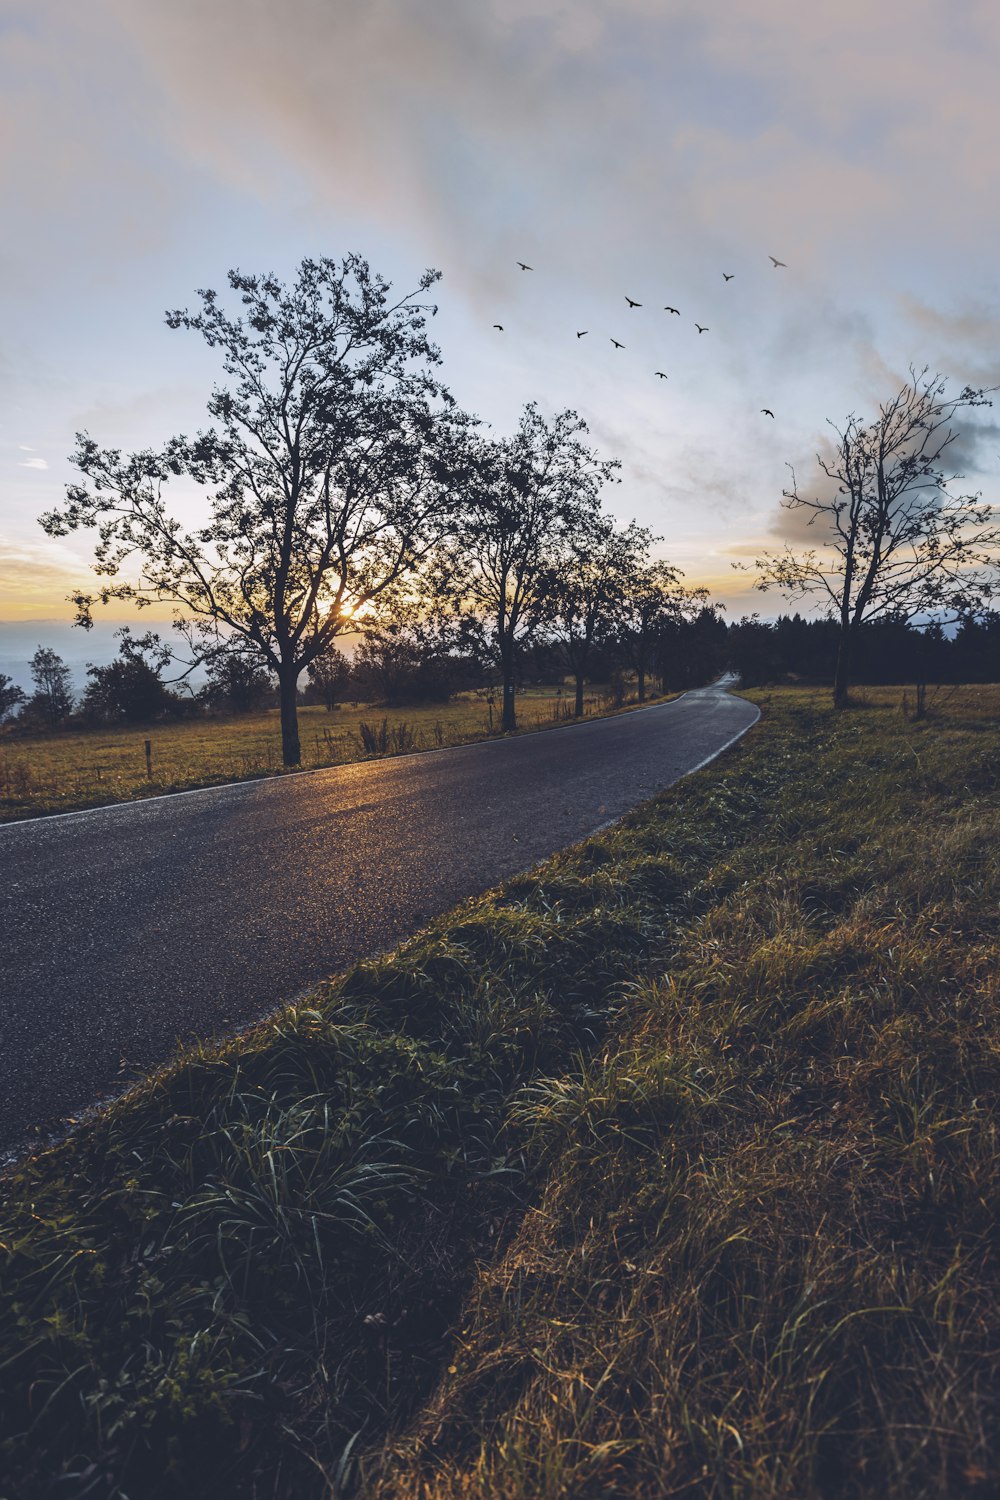 birds flying over a rural road at sunset